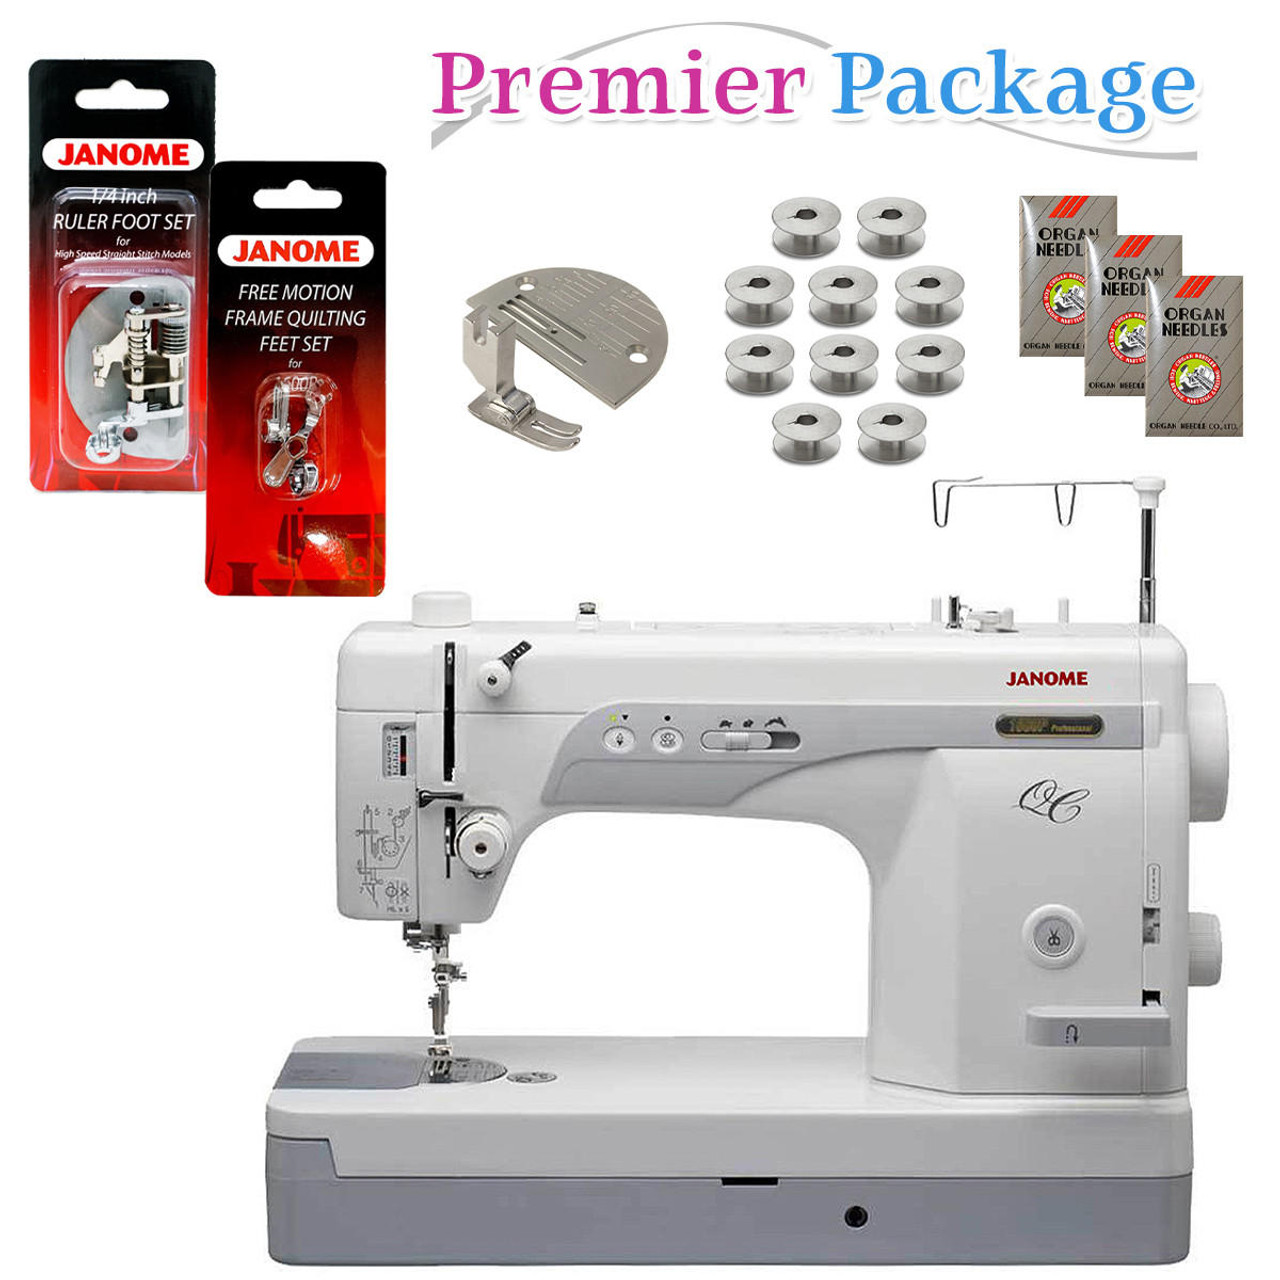 Elna 2130 Sewing Machine reviews and information